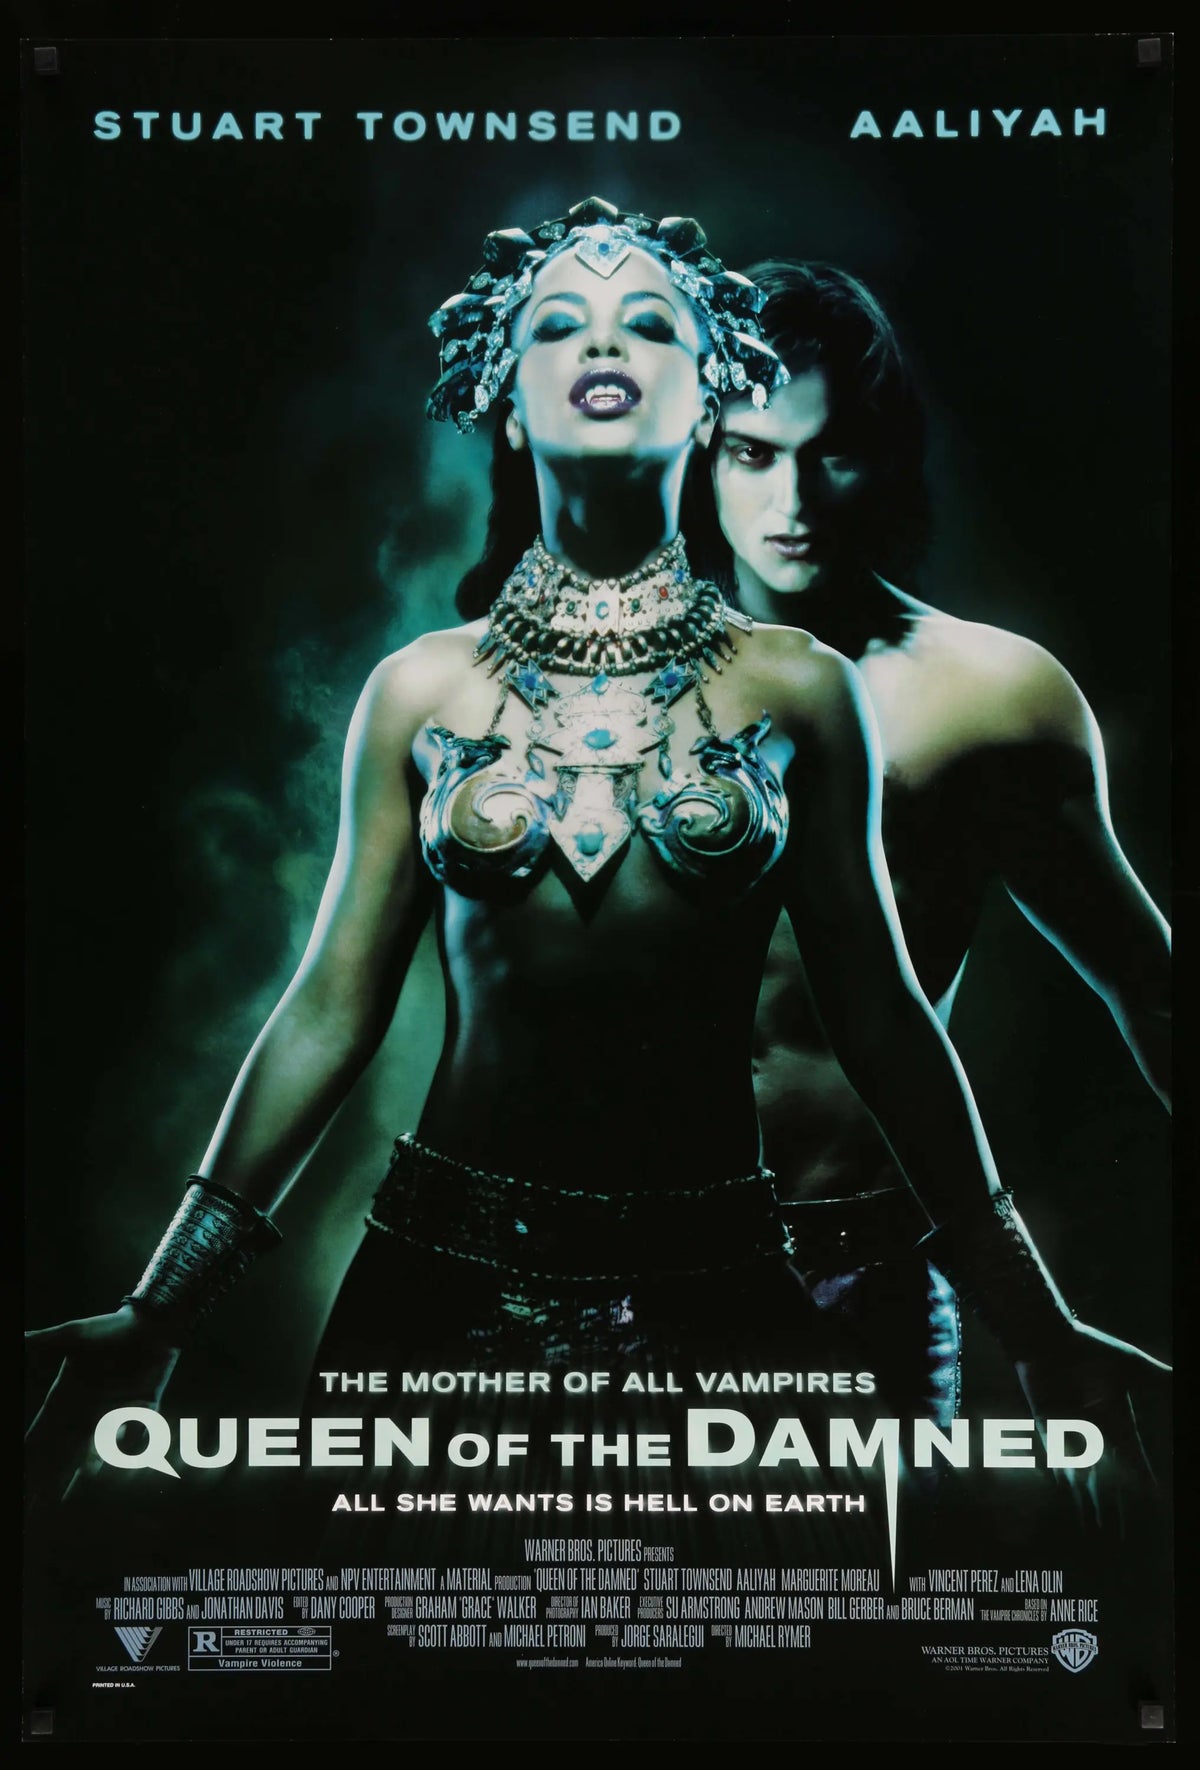 Queen of the Damned (2001) original movie poster for sale at Original Film Art